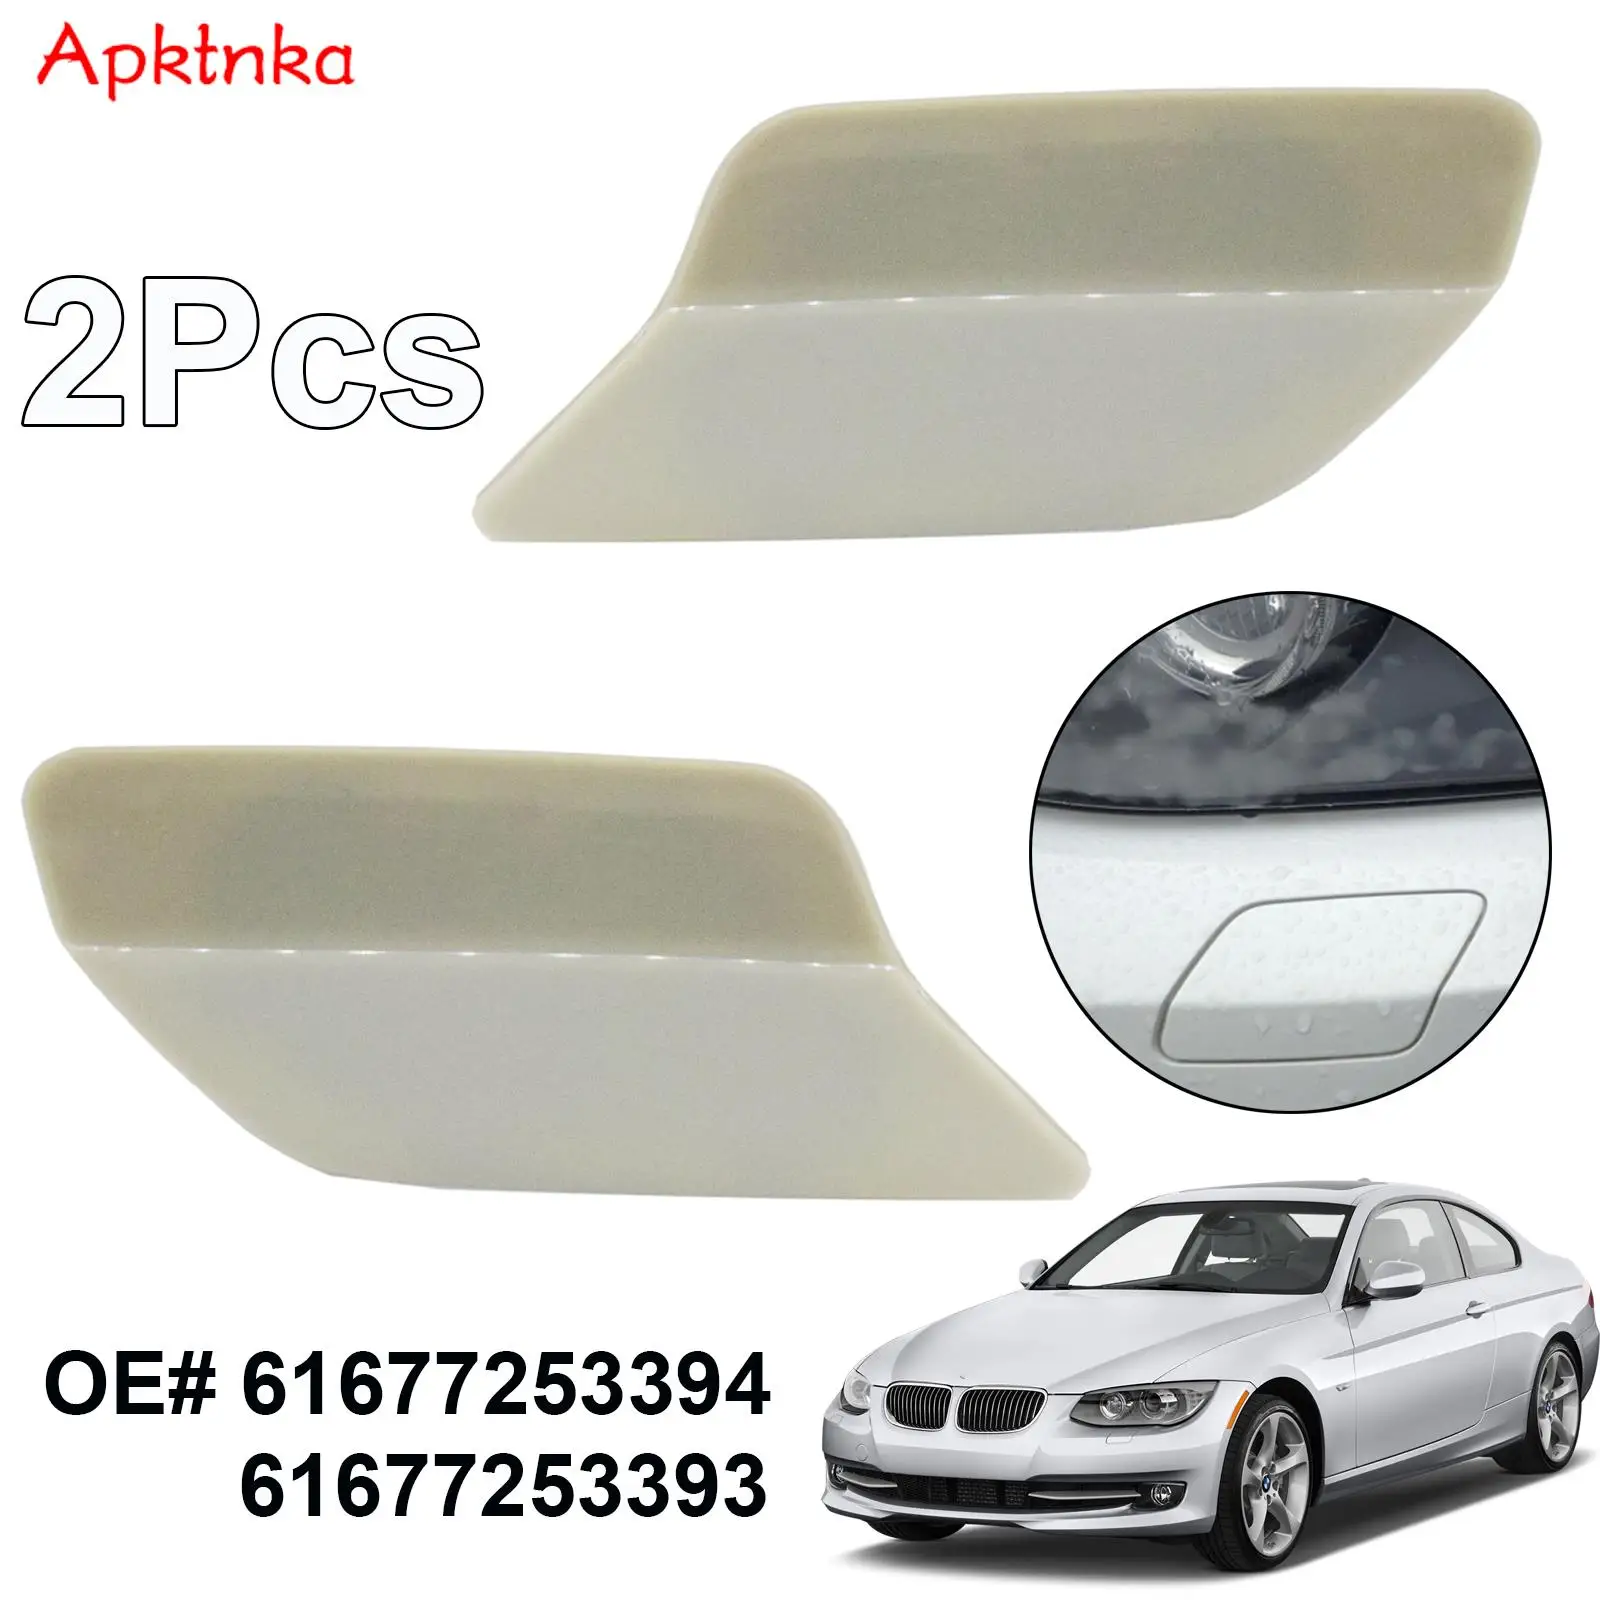 

Front Bumper Headlight Washer Nozzle Cover Cap For BMW 3 Series Coupe E92 E93 328i 335i 335is 2 Doors 61677253393 61677253394